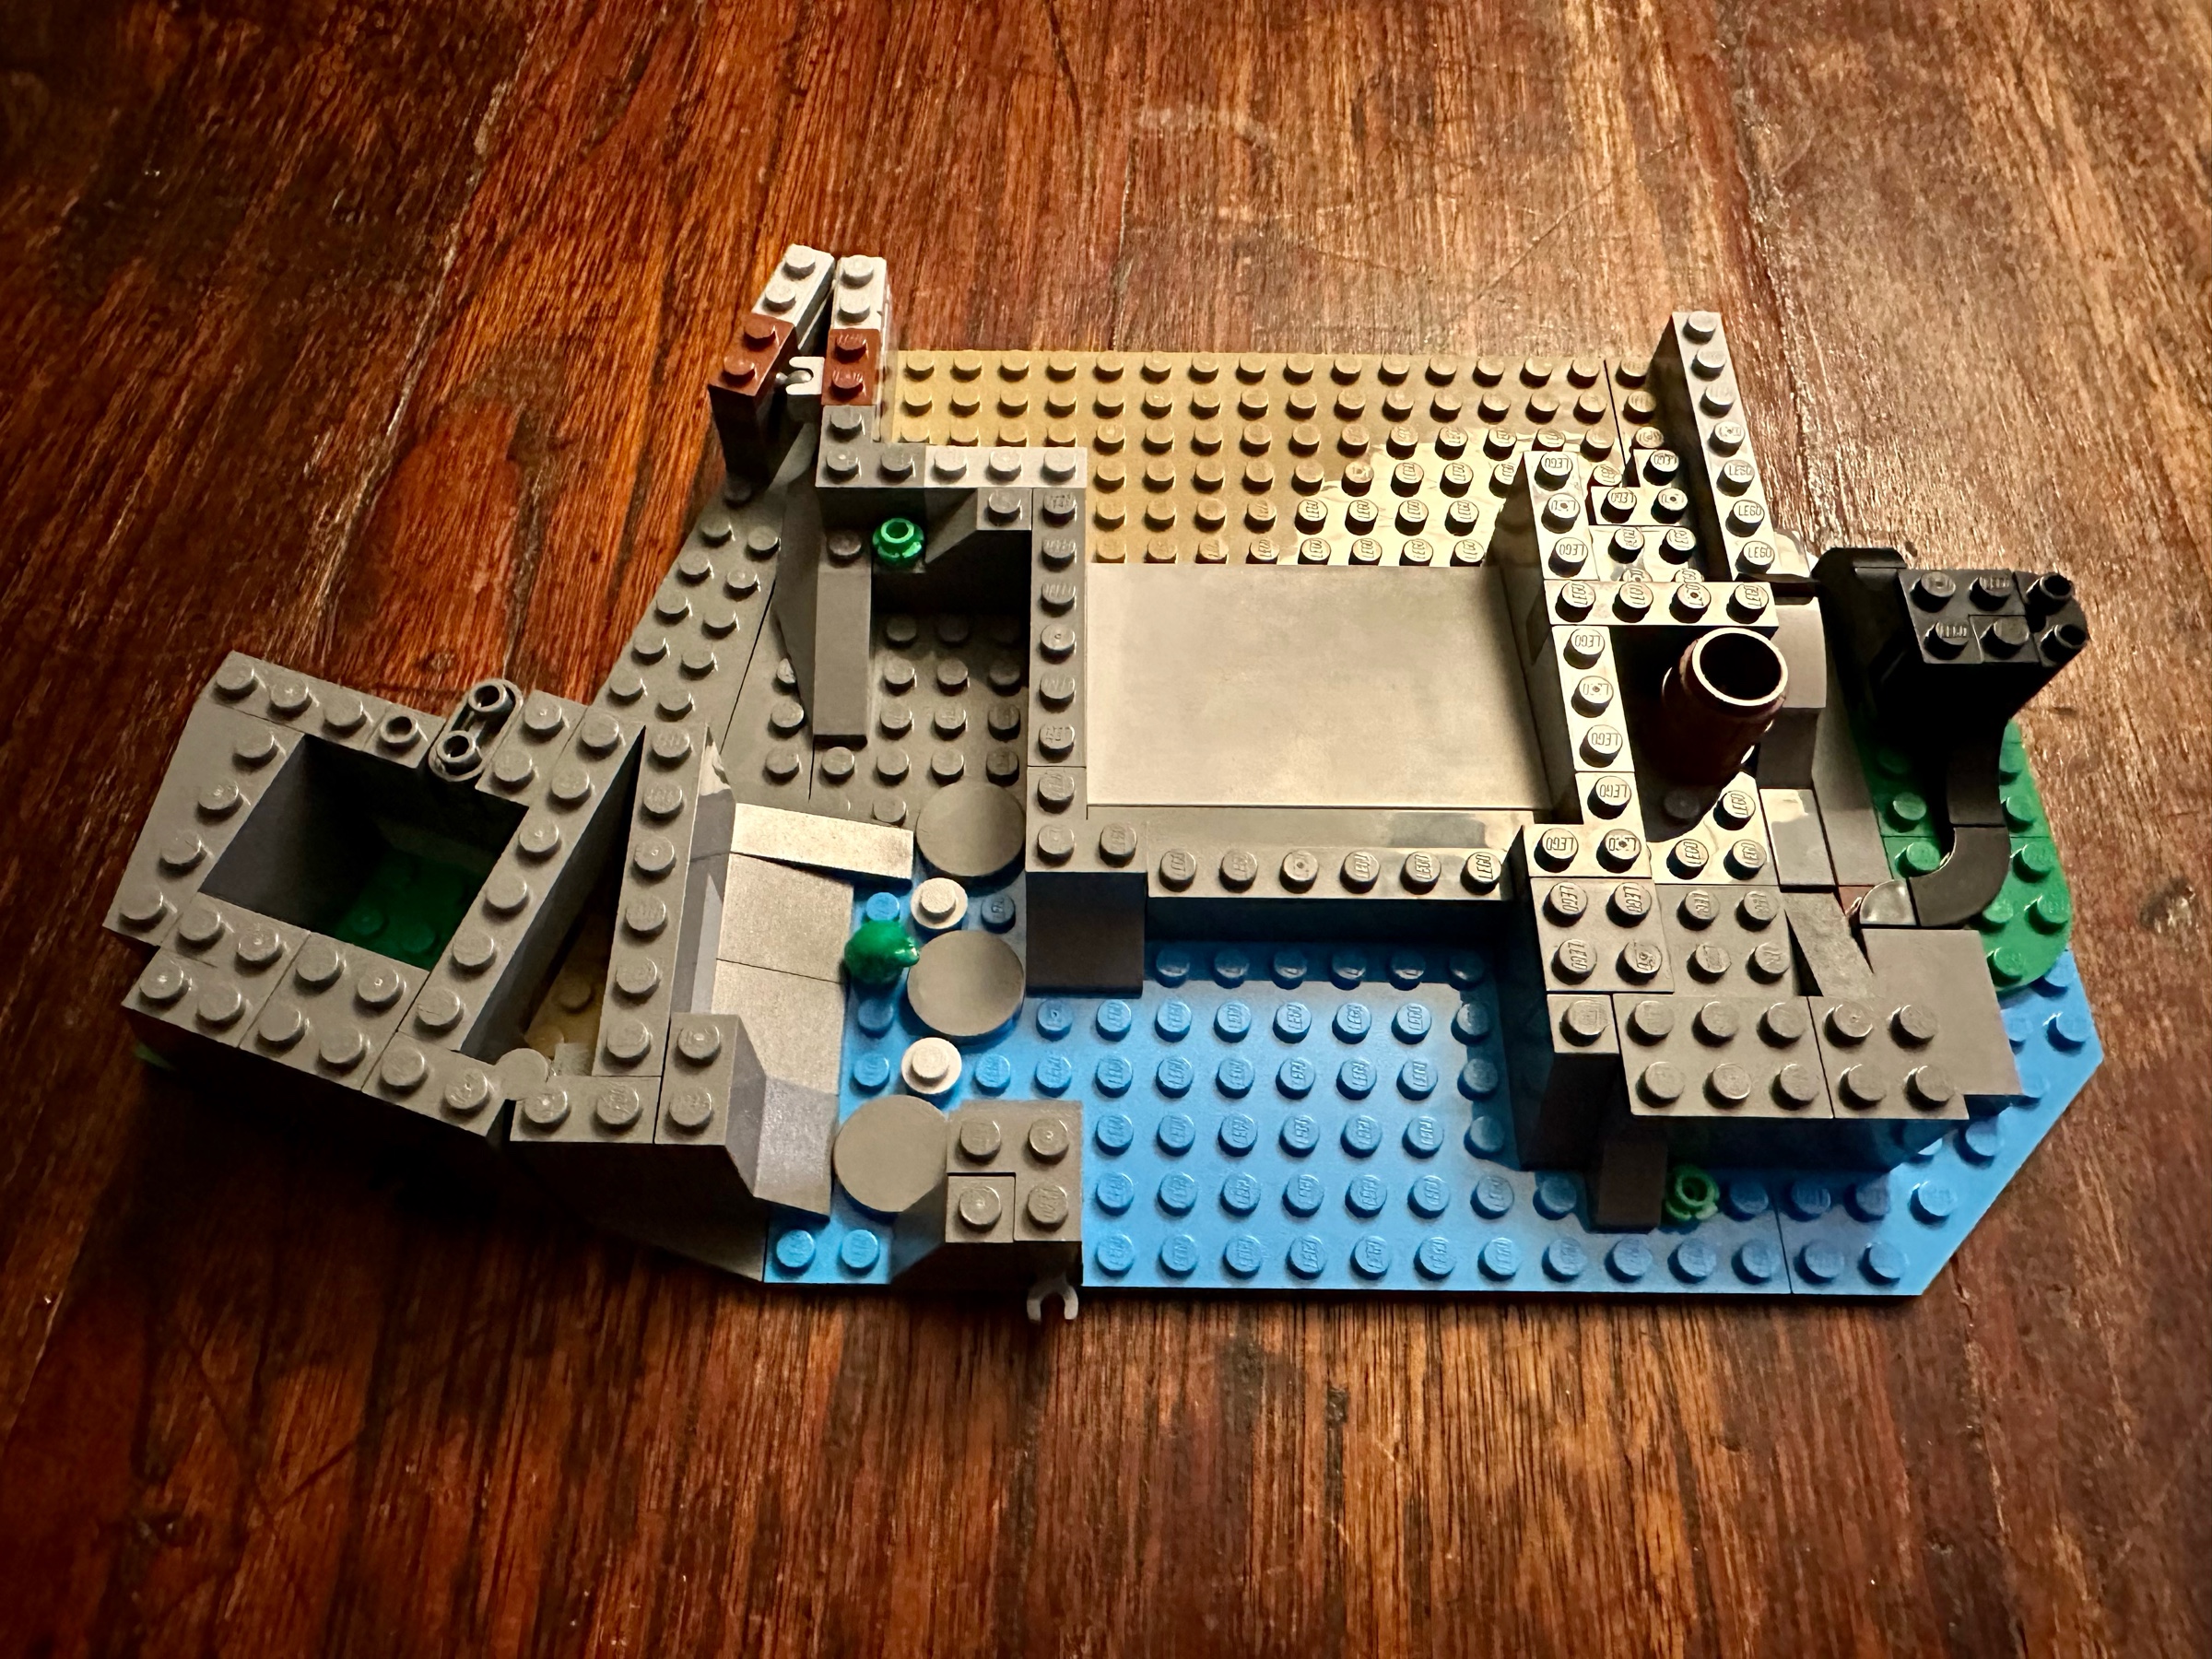 Foundations of LEGO castle showing water, stone, and an earthern floor. The roots of a black-trunked tree are on the right.